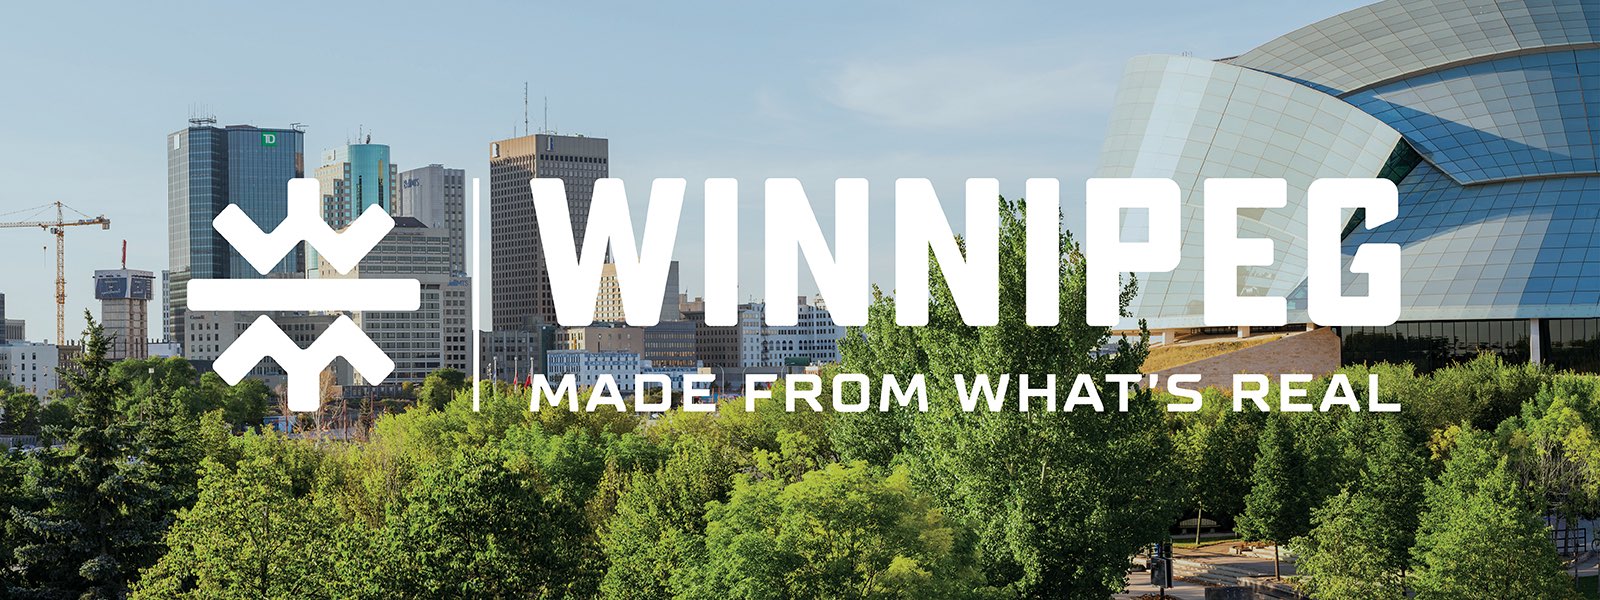 Conference - Winnipeg: Made from what's real